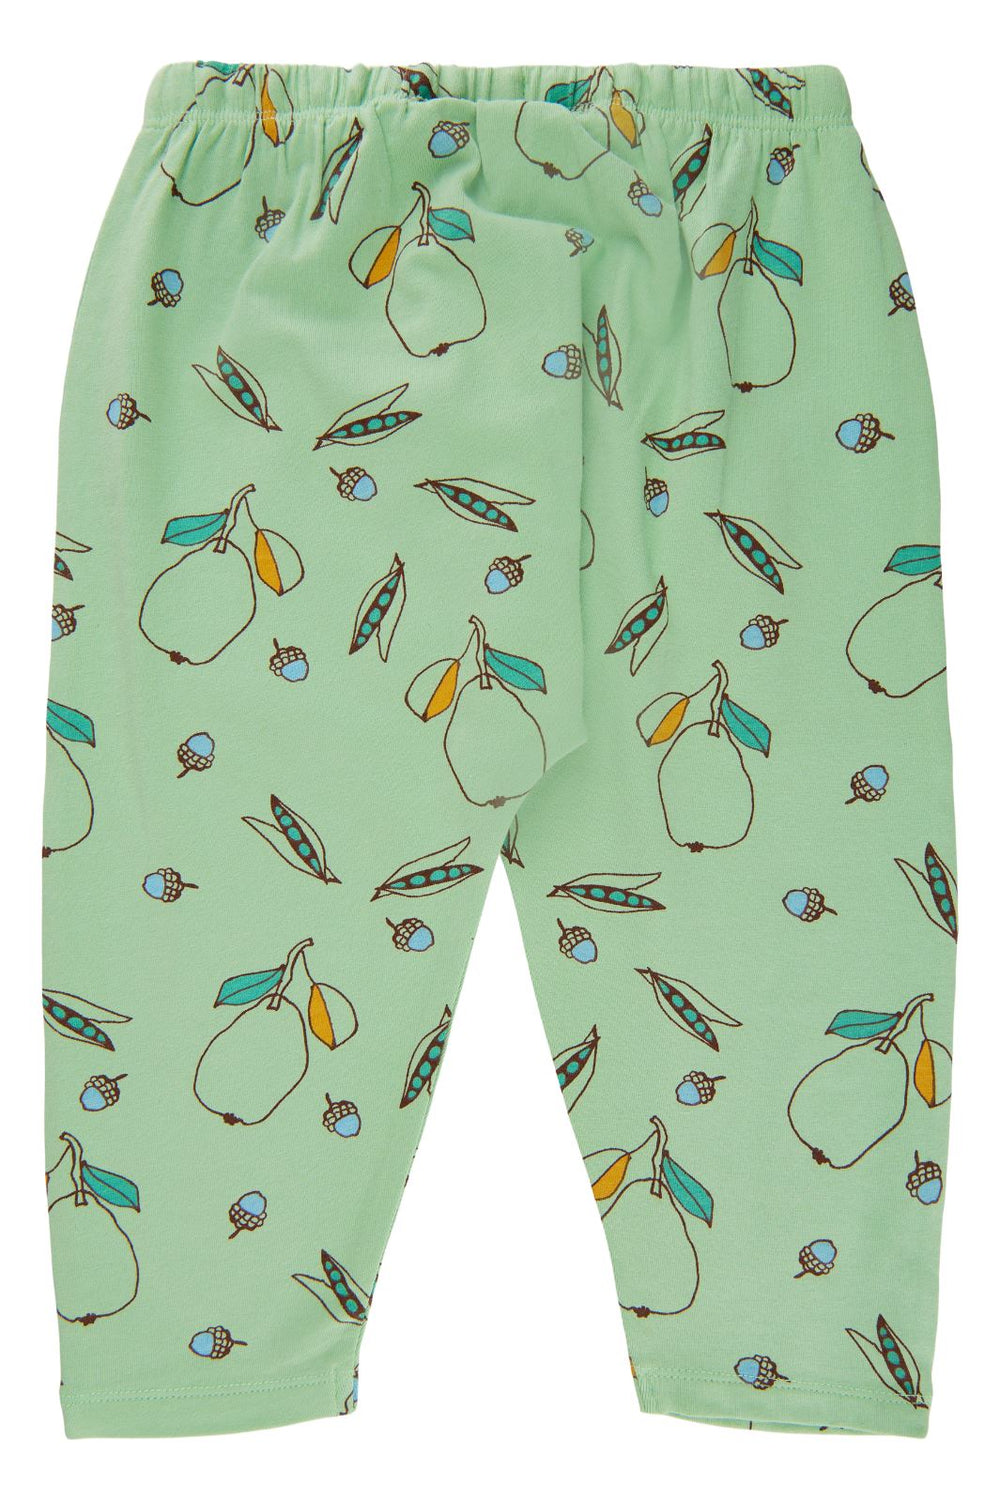 Soft Gallery - SGHailey Pear Pants - Quiet Green Bukser 